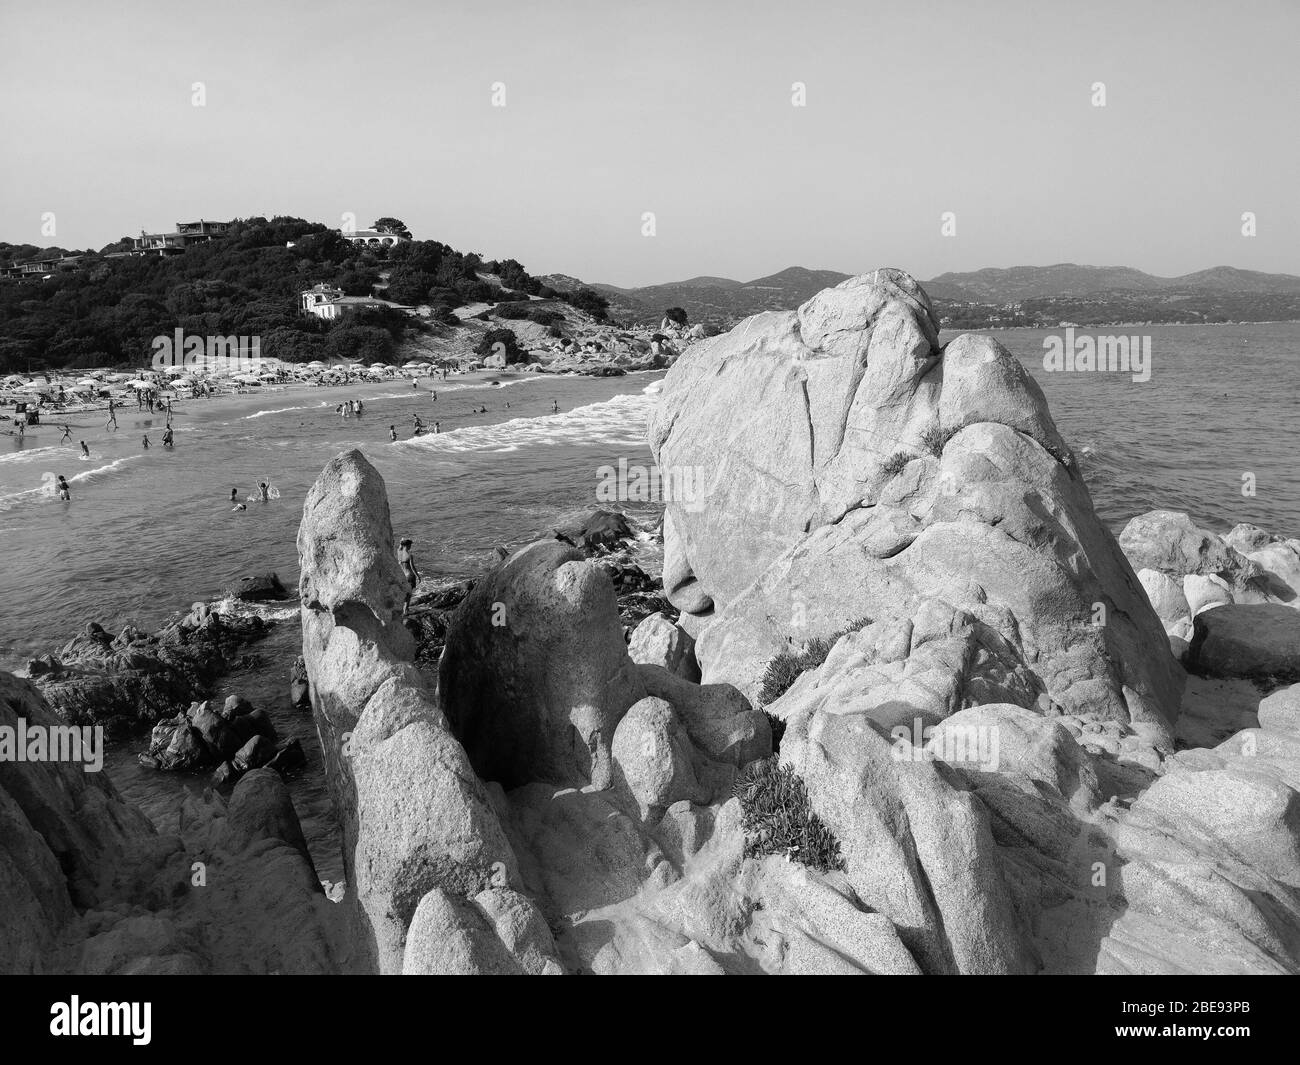 Tourists and bathers on the sand and rock beaches typical of Sardinia. Stock Photo